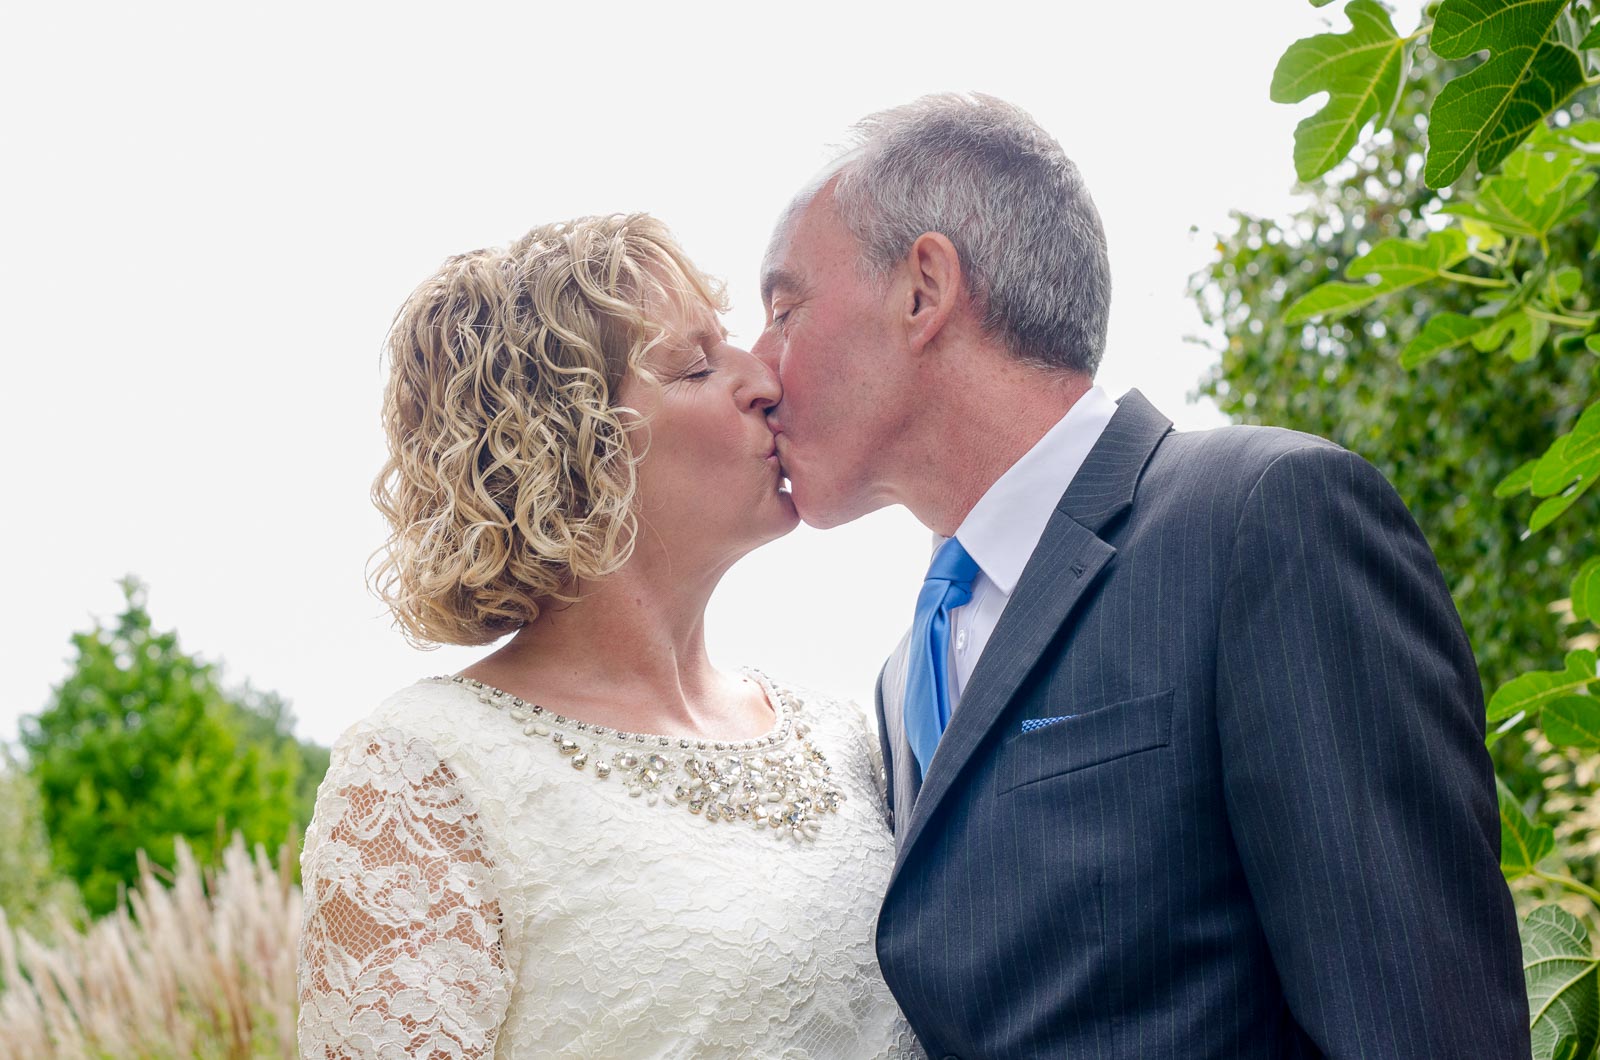 Wendy and Chris kiss in Southover Grange after their wedding at lewes Register Office.